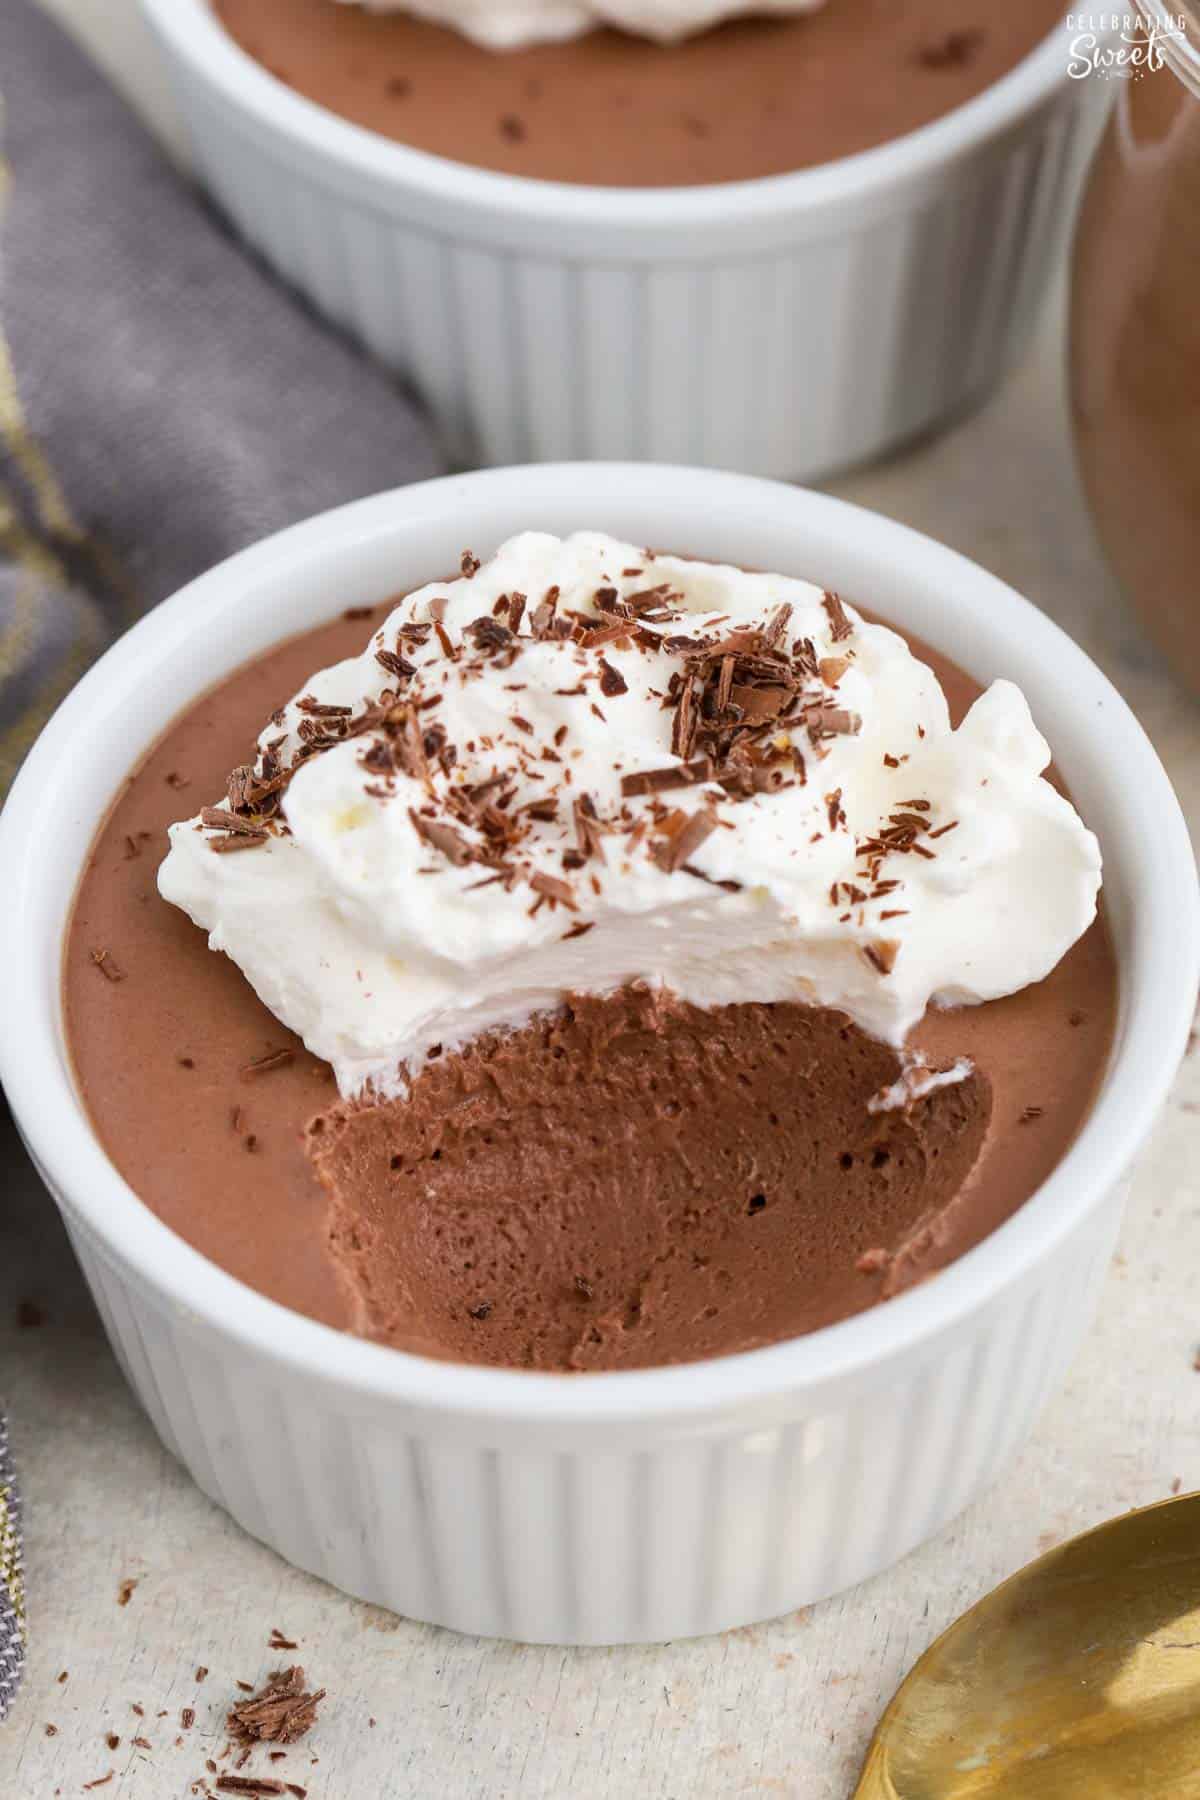 Chocolate mousse in a white ramekin topped with whipped cream.